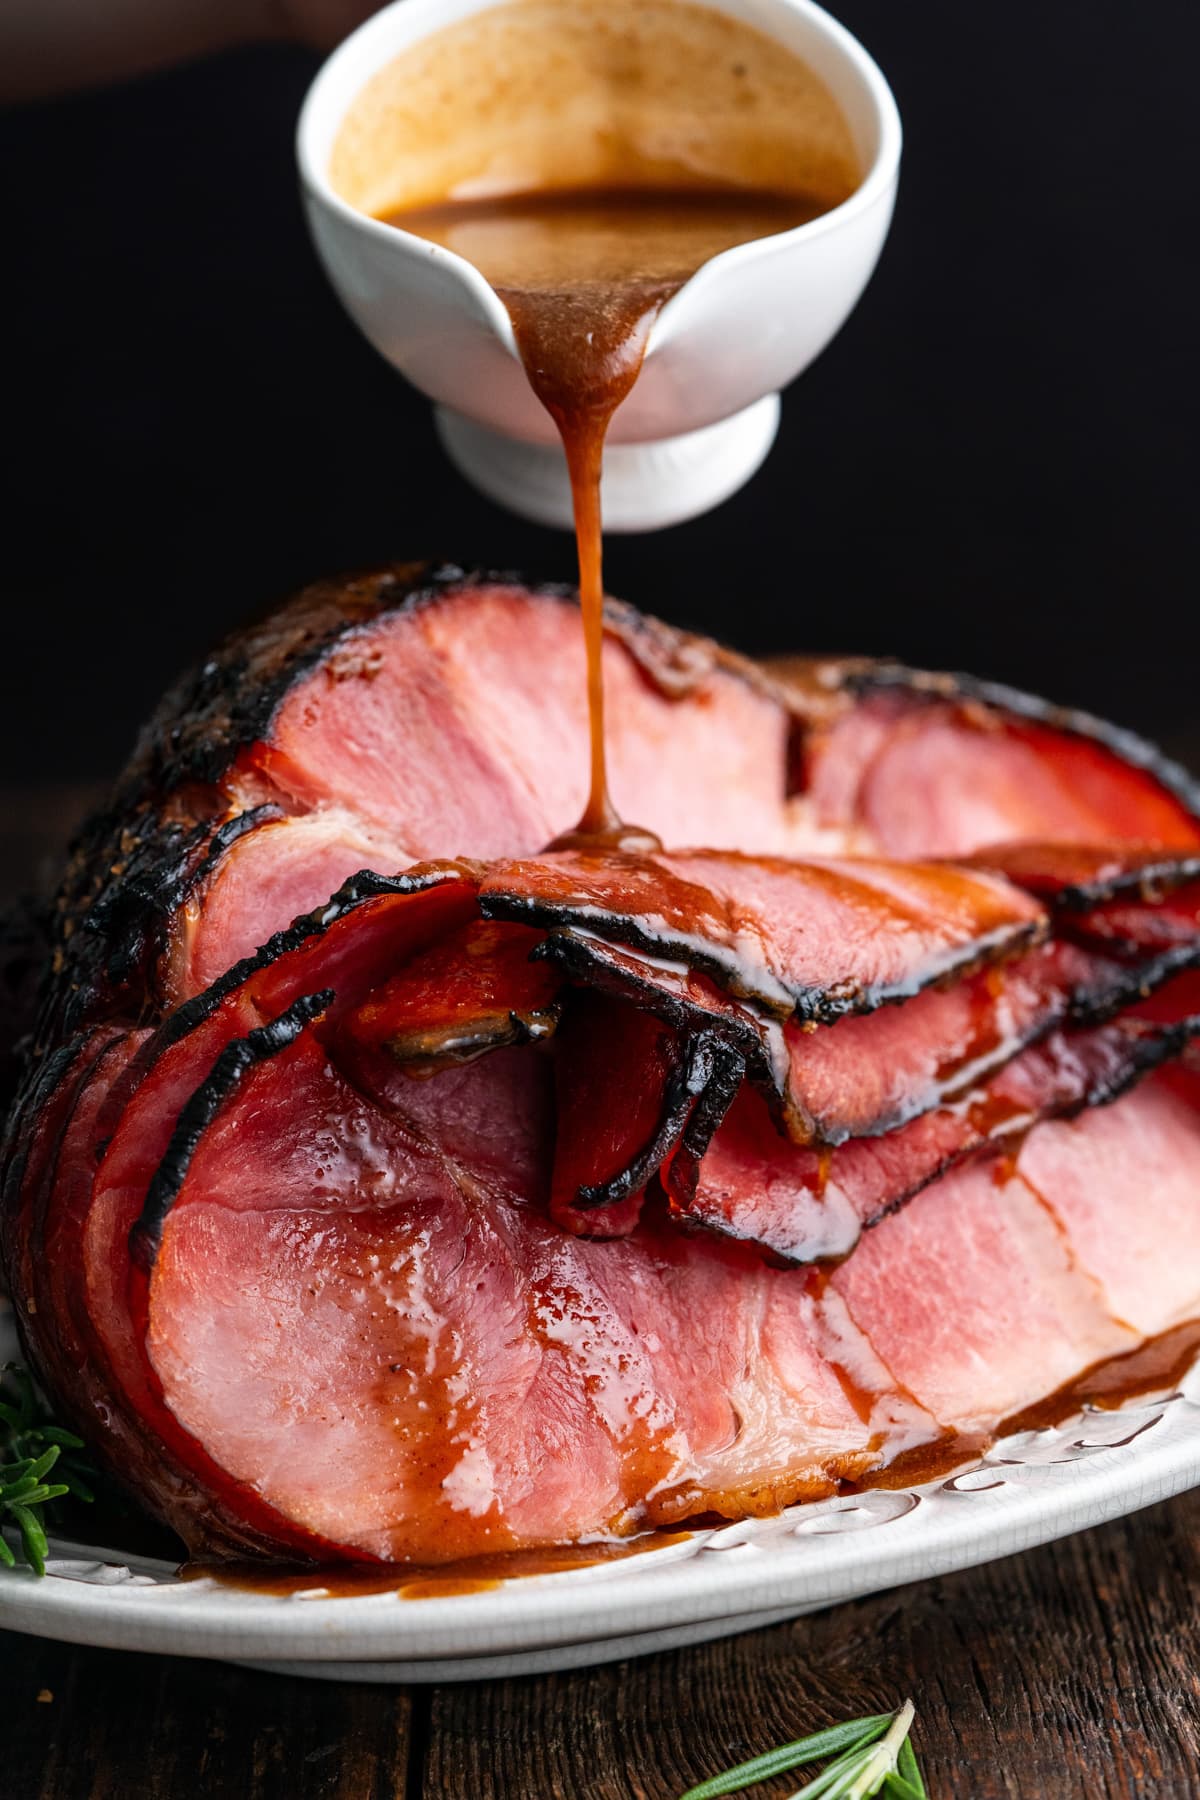 Glaze being poured over a baked ham.